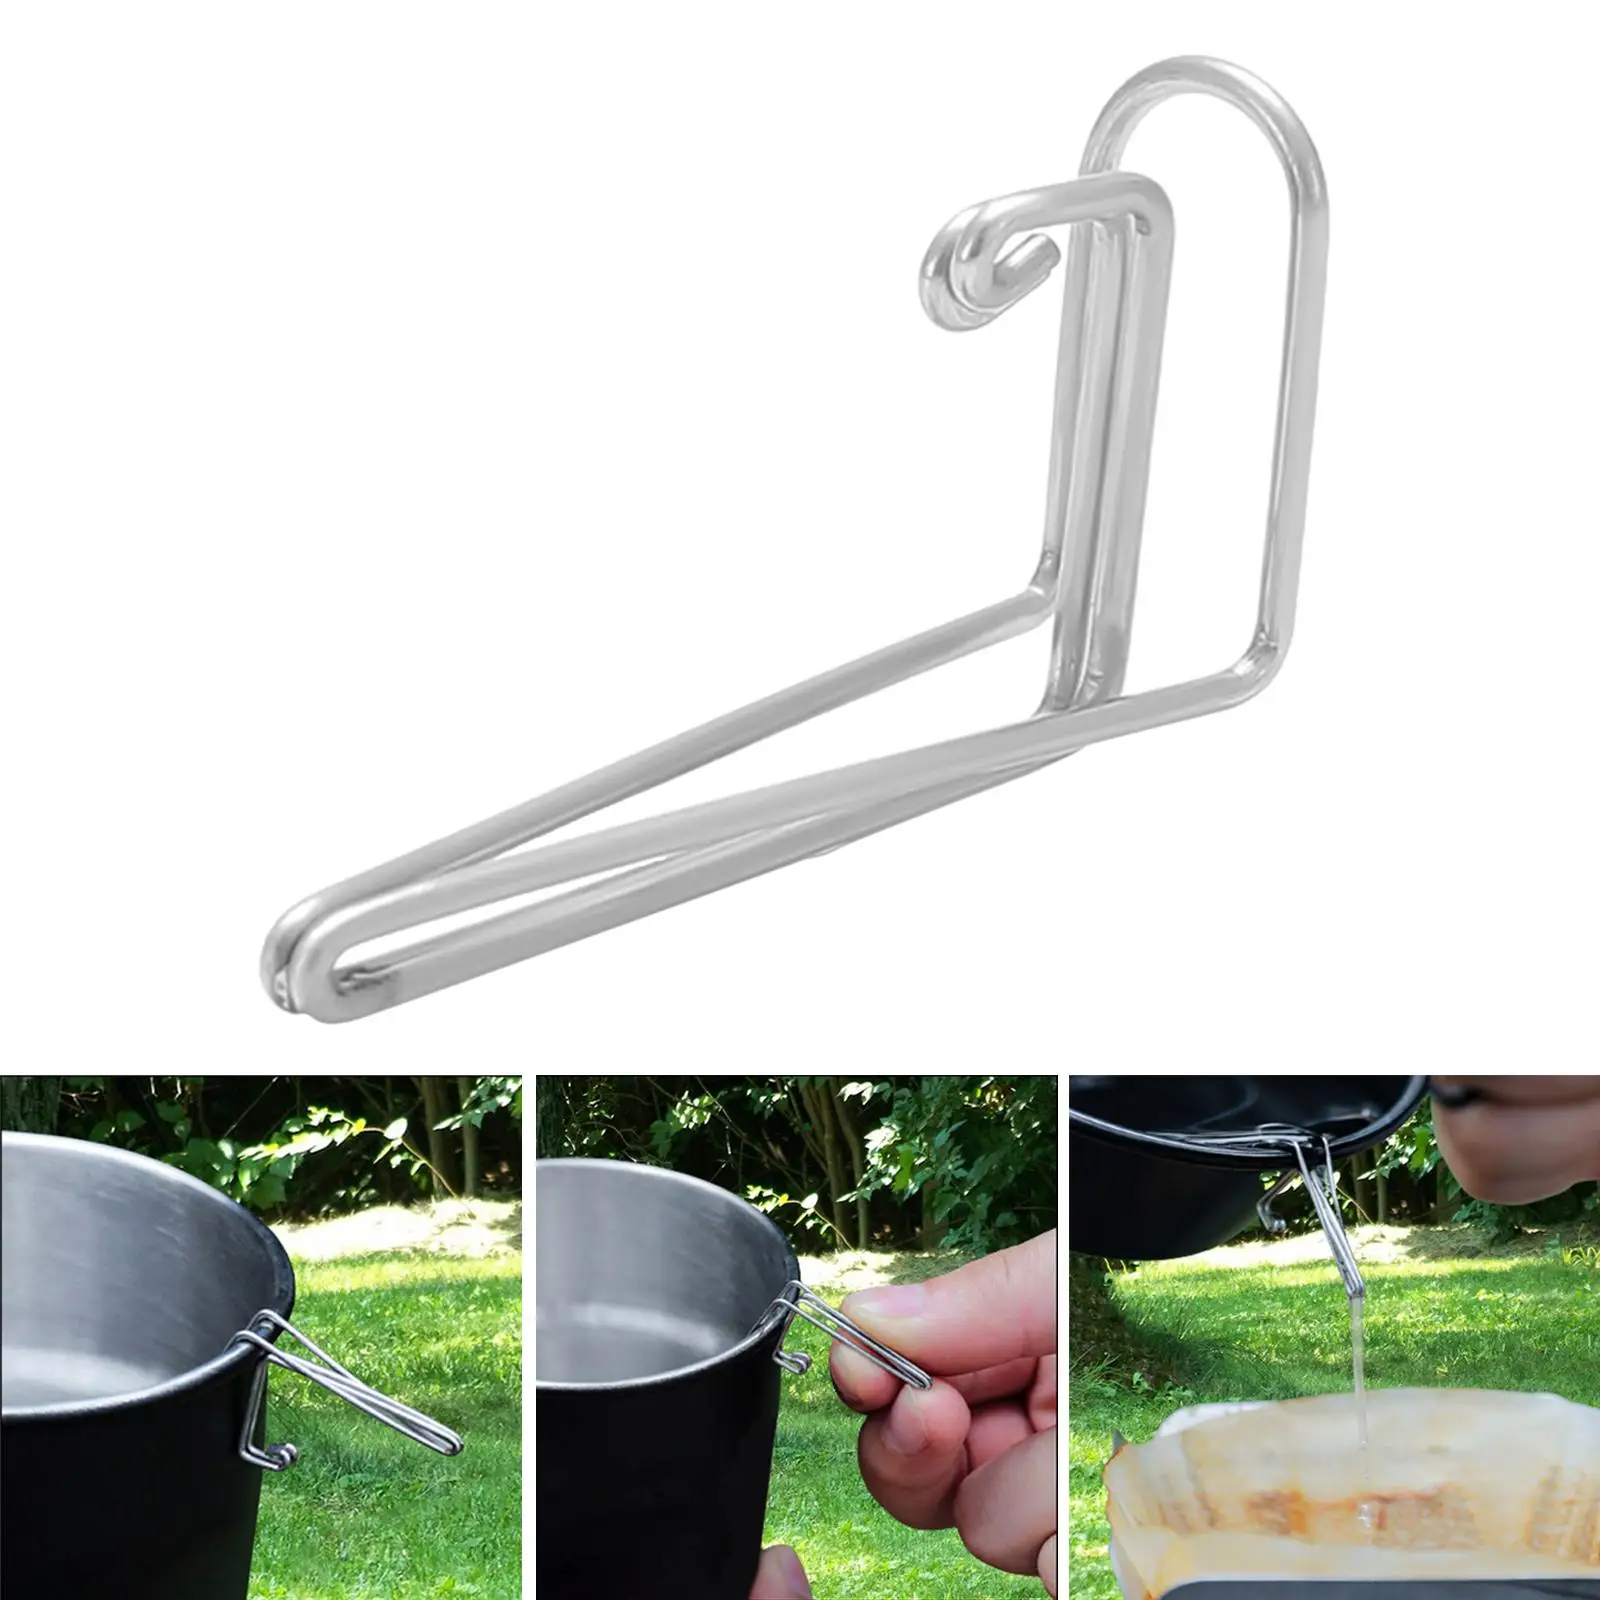 Pouring Spout for Camping Bowl Portable Stainless Steel Lightweight Extension Spout for Travel Outdoor BBQ Backpacking Hiking